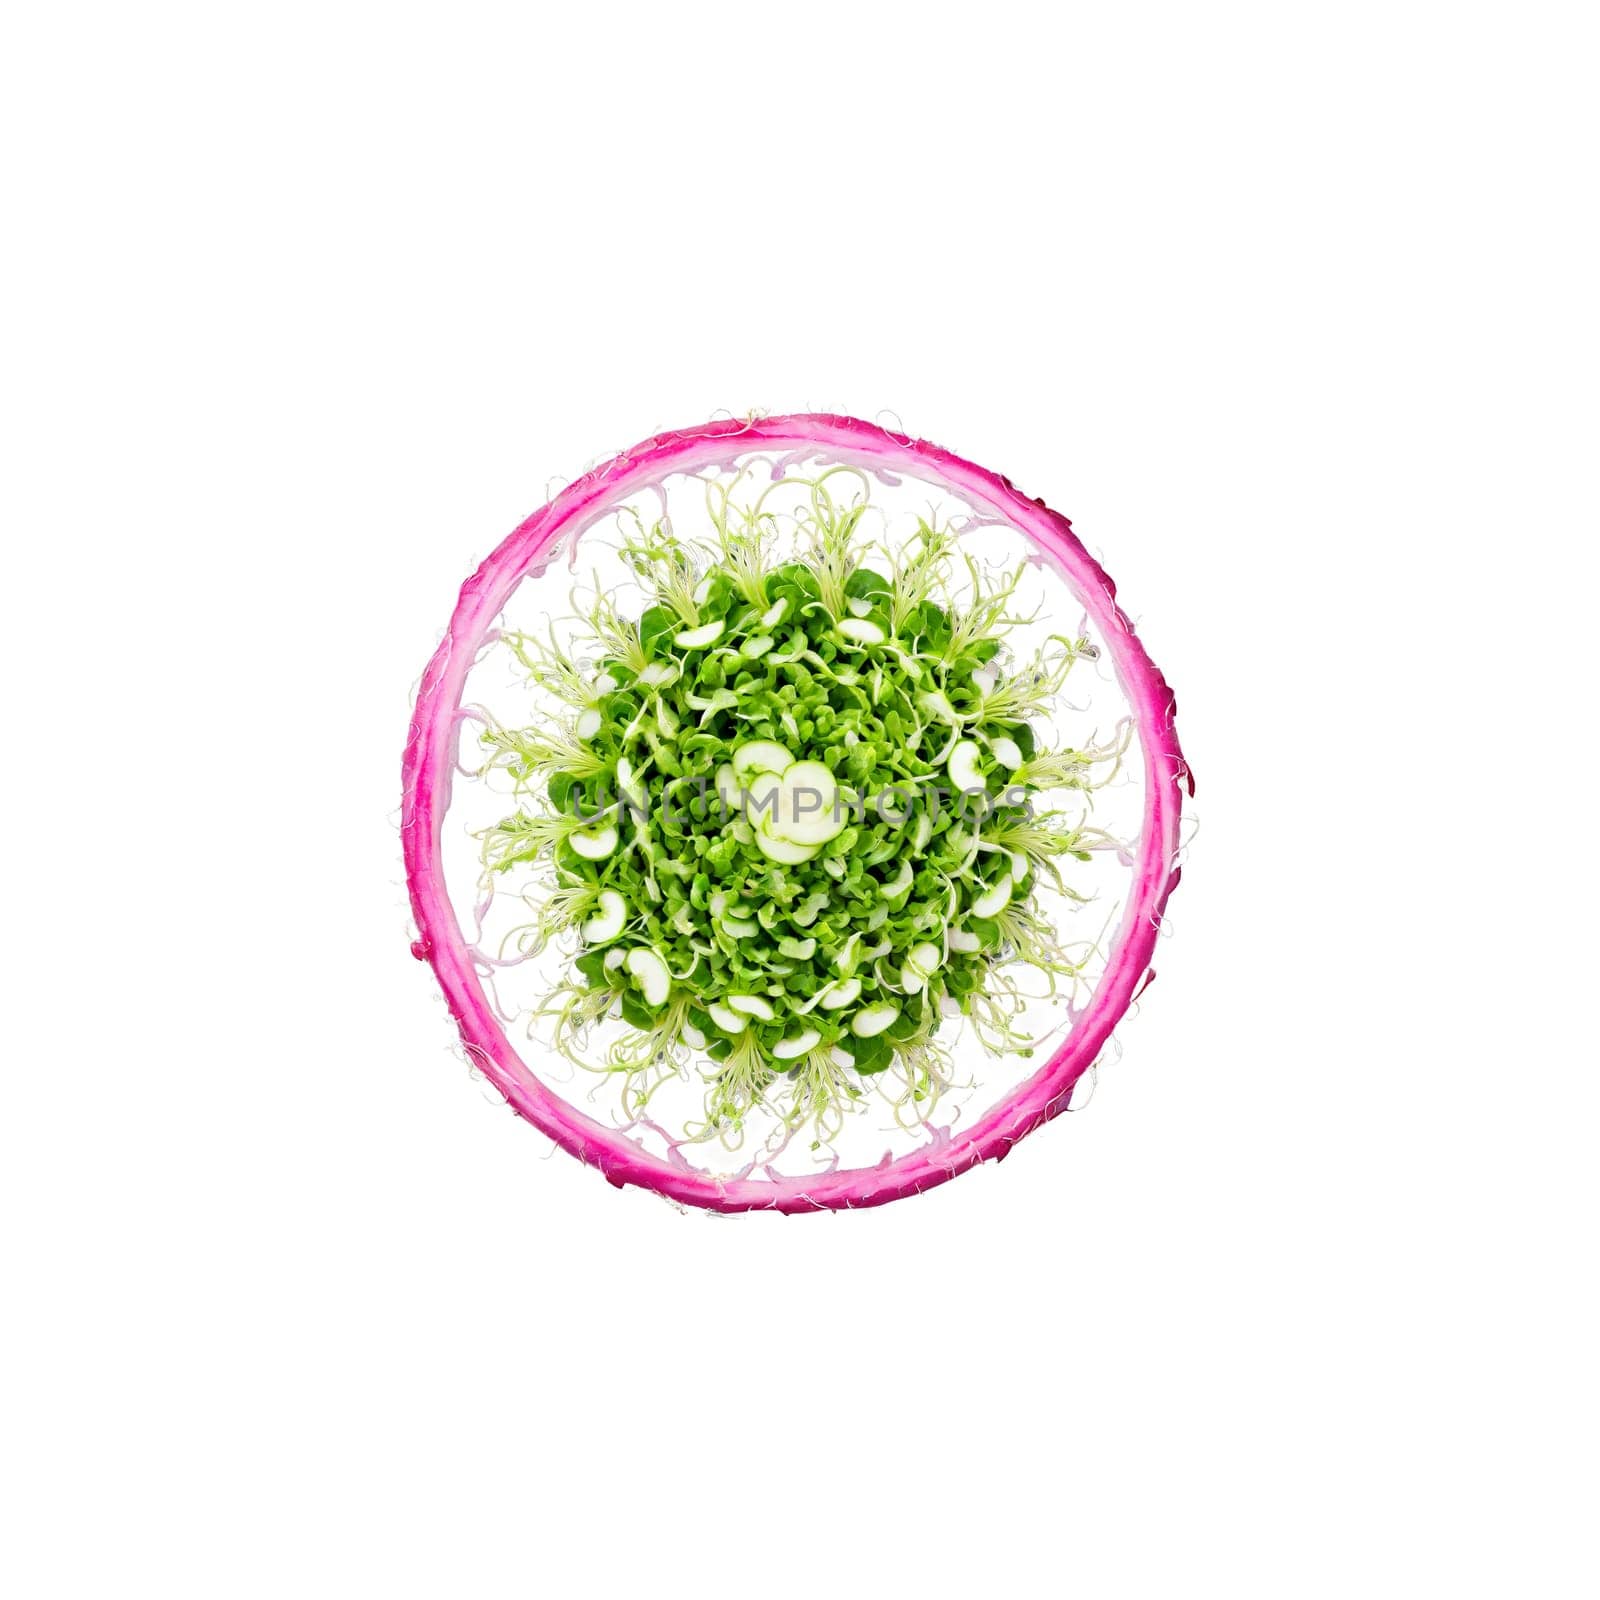 Radish Sprout Mandala vibrant pink radish sprouts forming a captivating spiral leaves gracefully fluttering by panophotograph